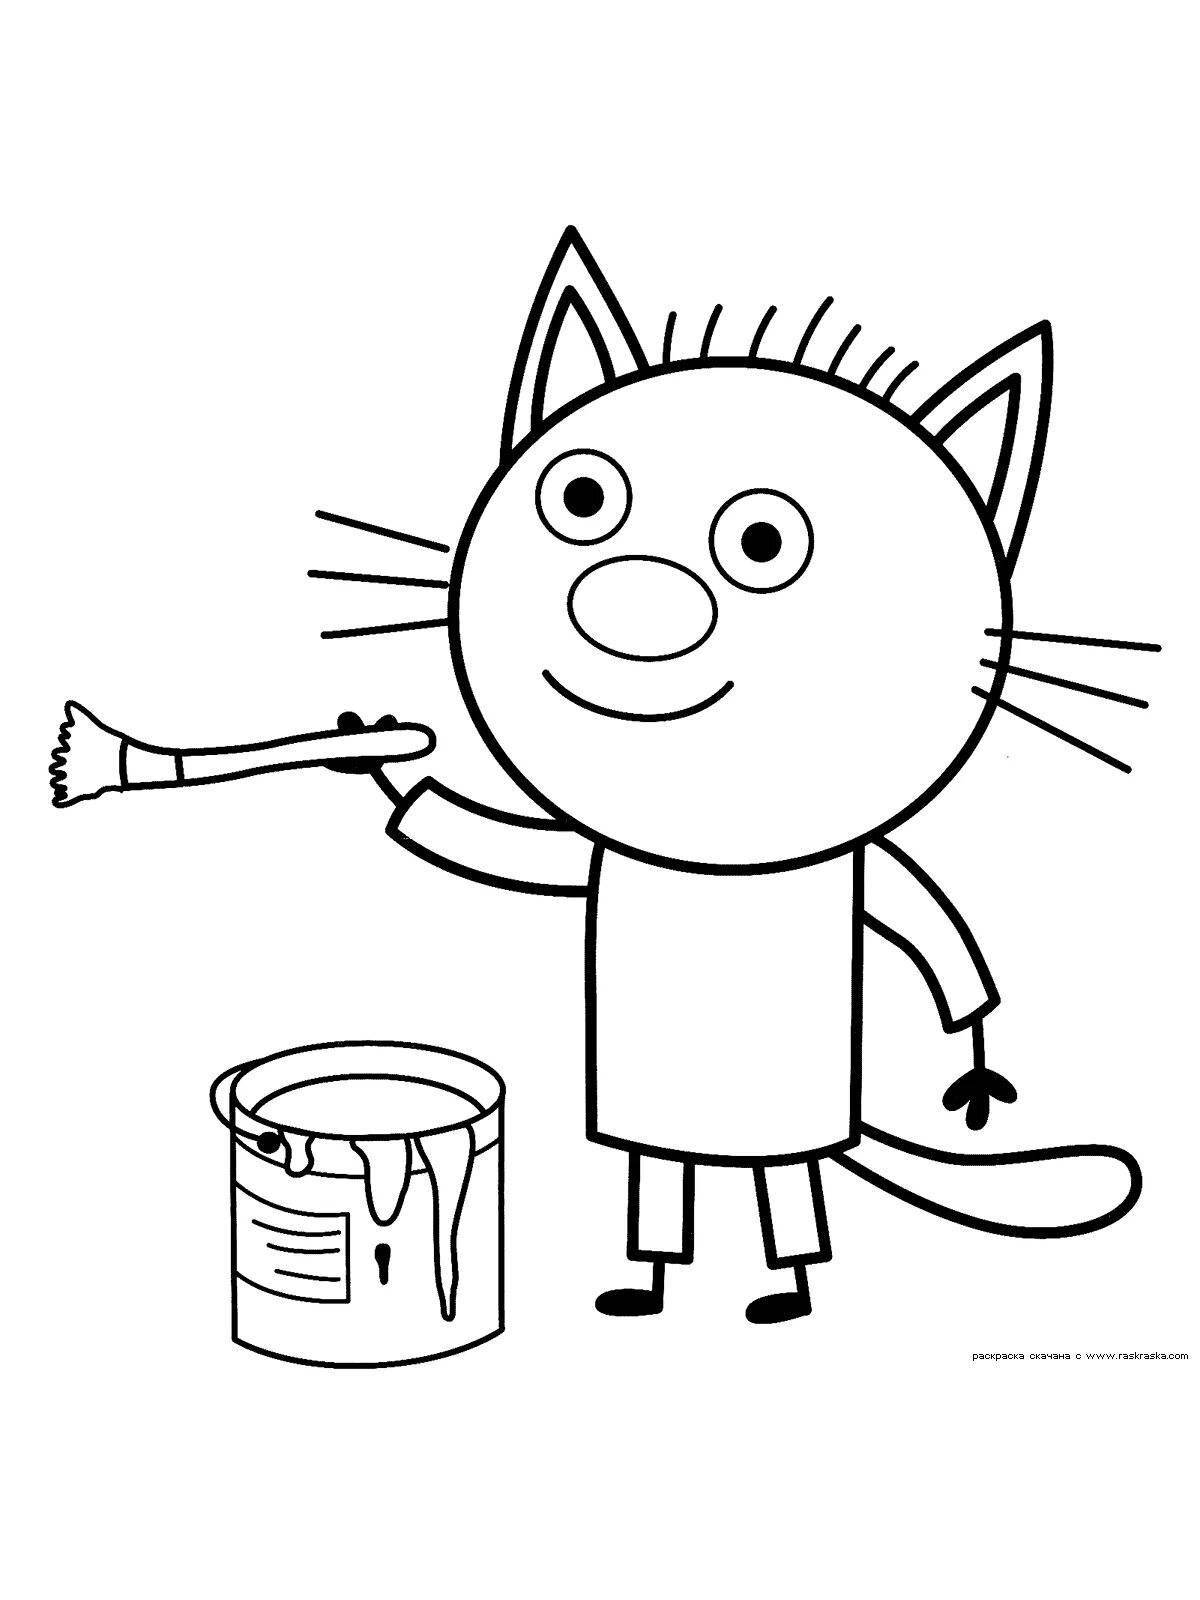 Three cats magic screw coloring page